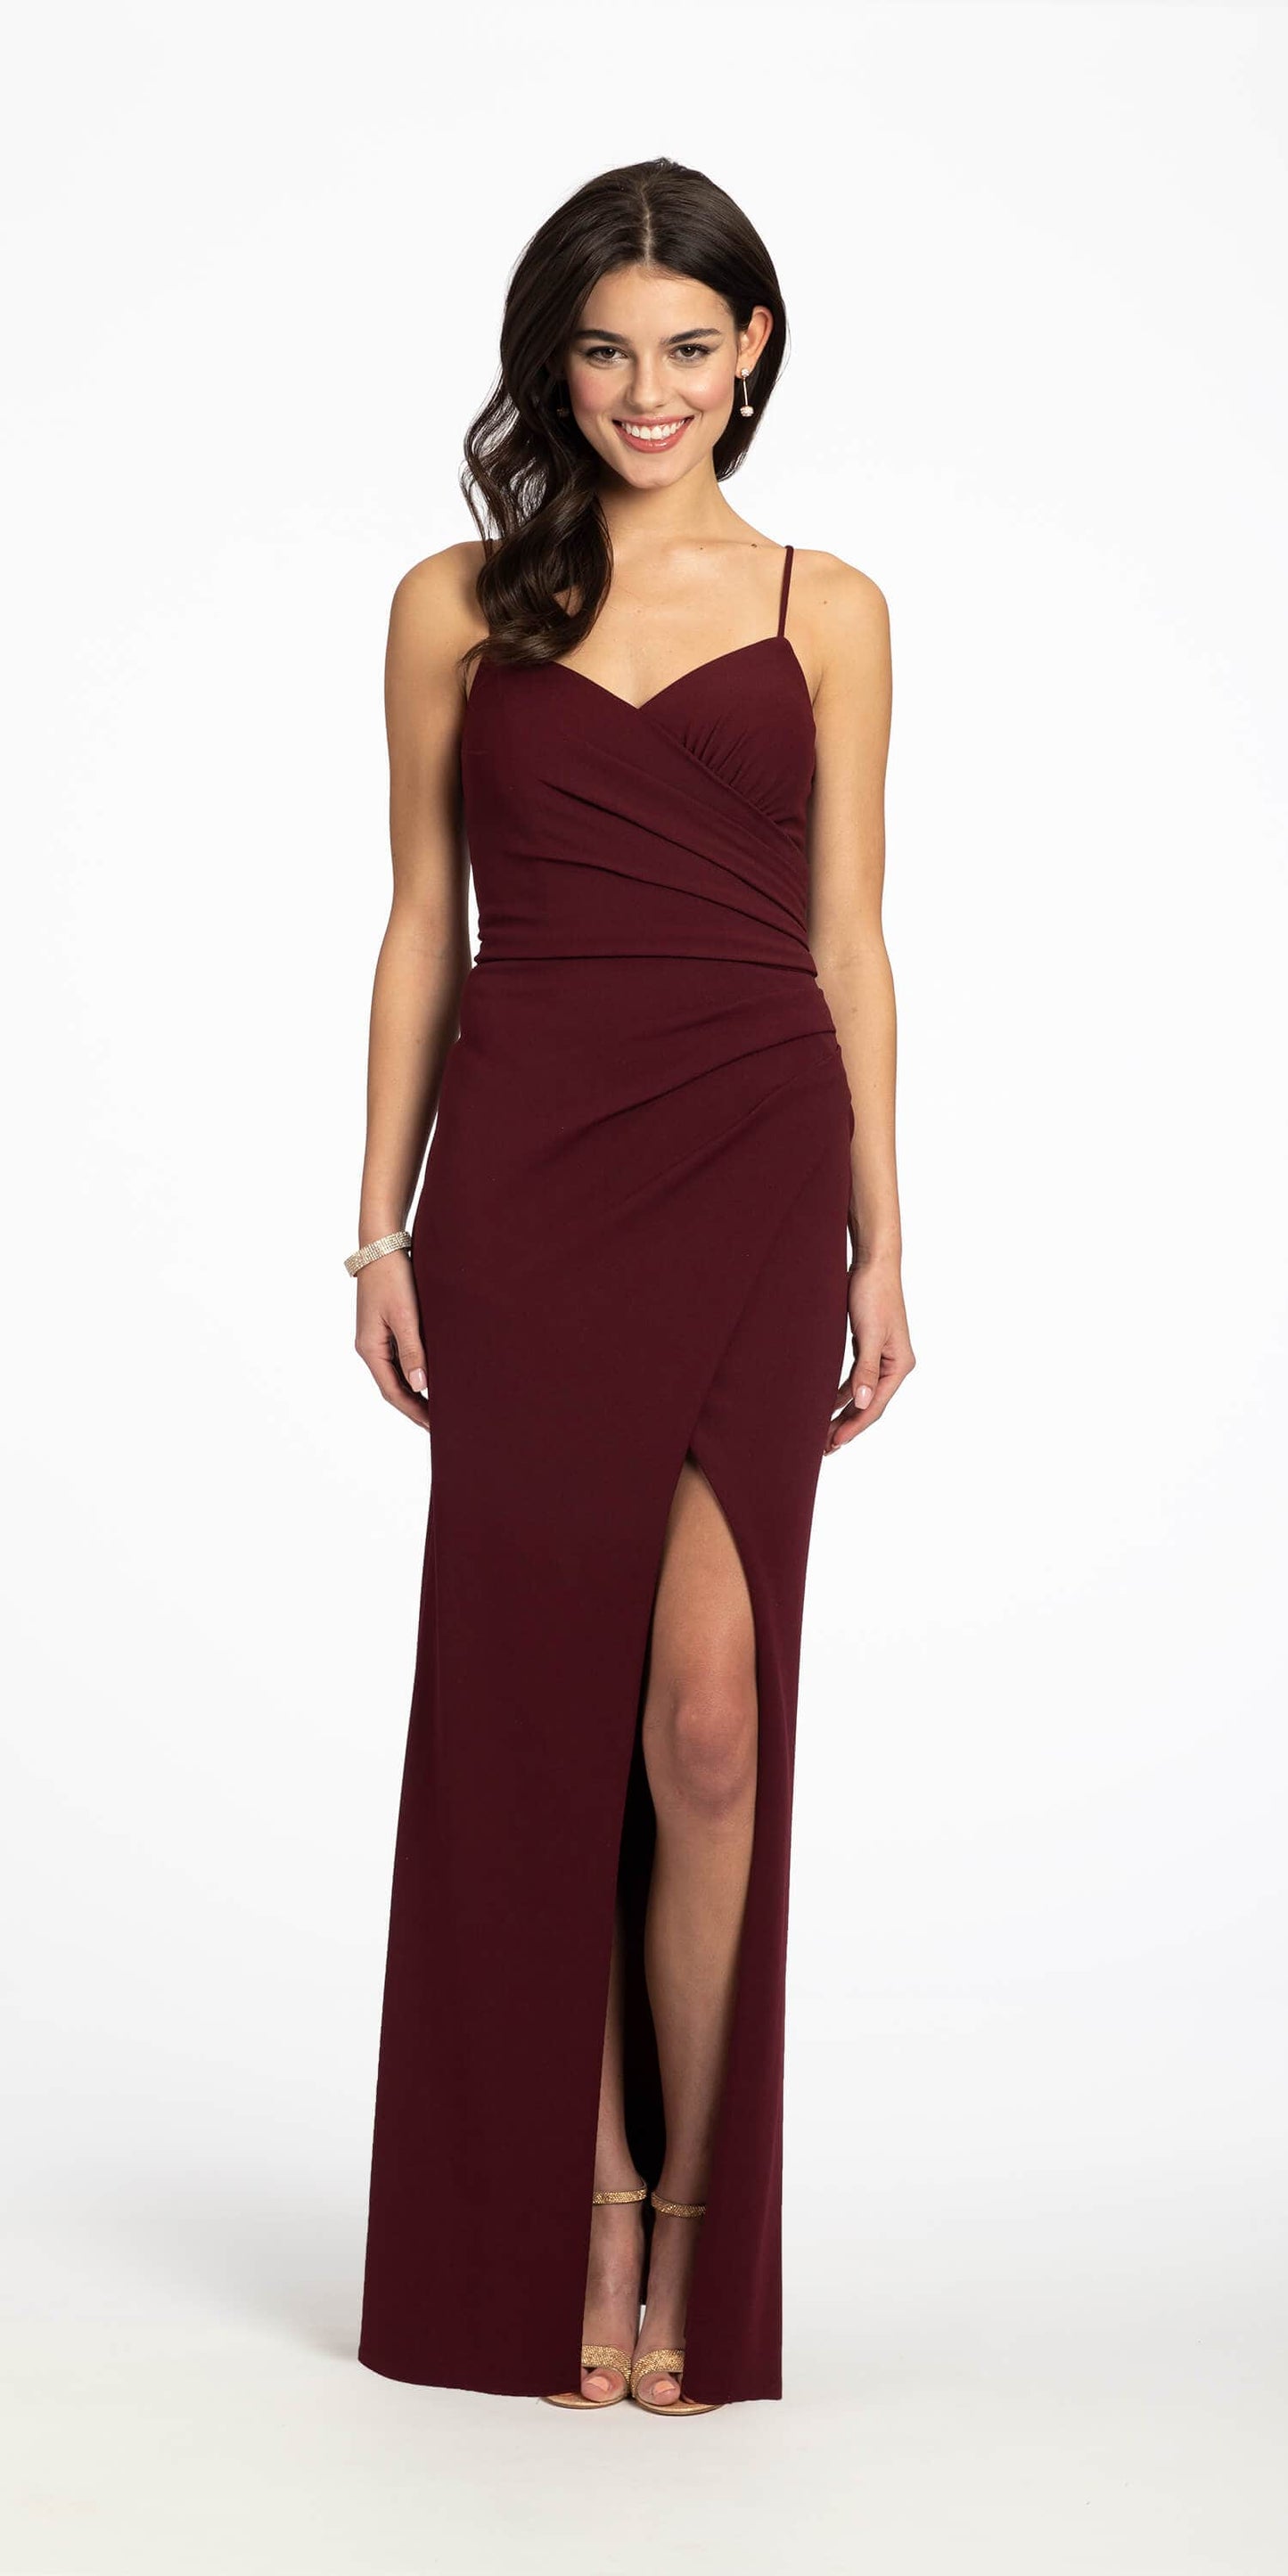 Camille La Vie Front Slit Stretch Crepe Sweetheart Dress with Ruching missy / 8 / wine